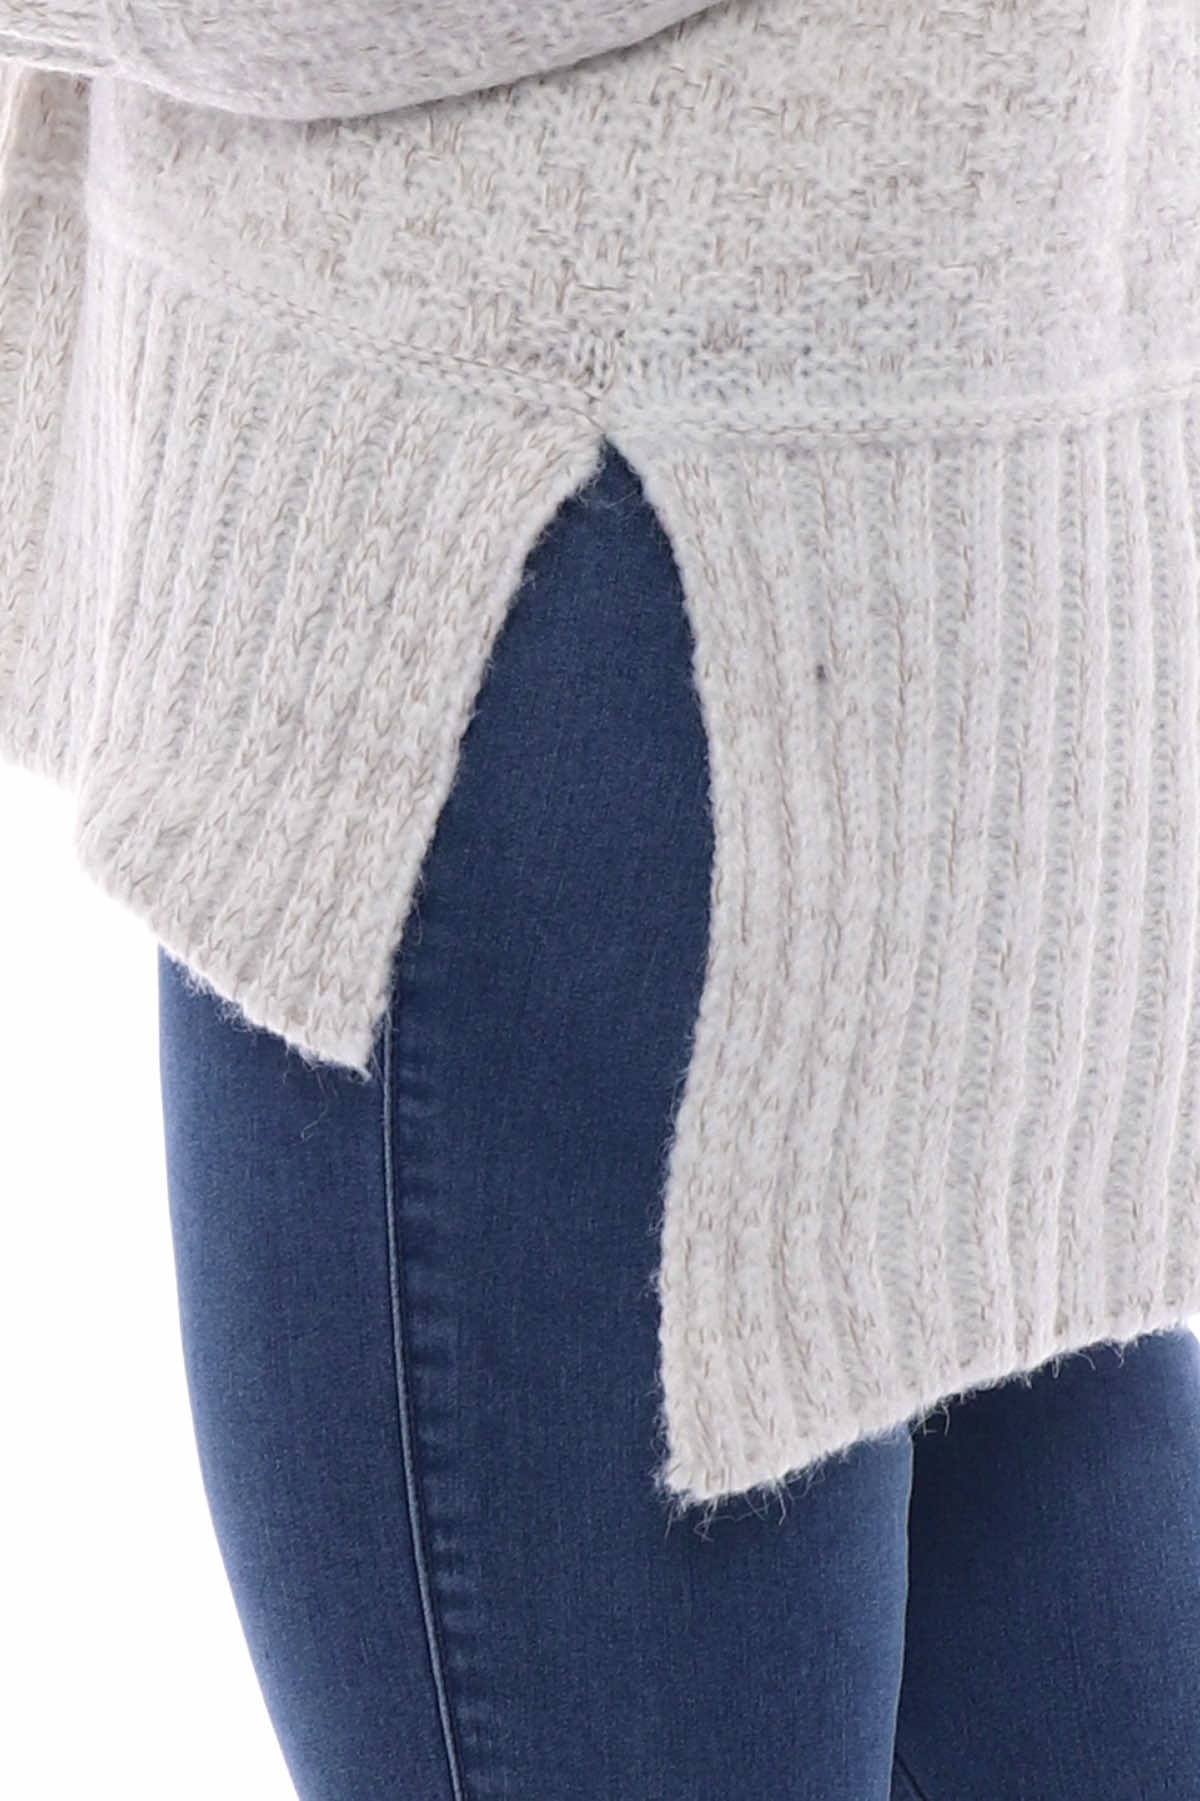 Halcyon Funnel Neck Knitted Jumper Cream